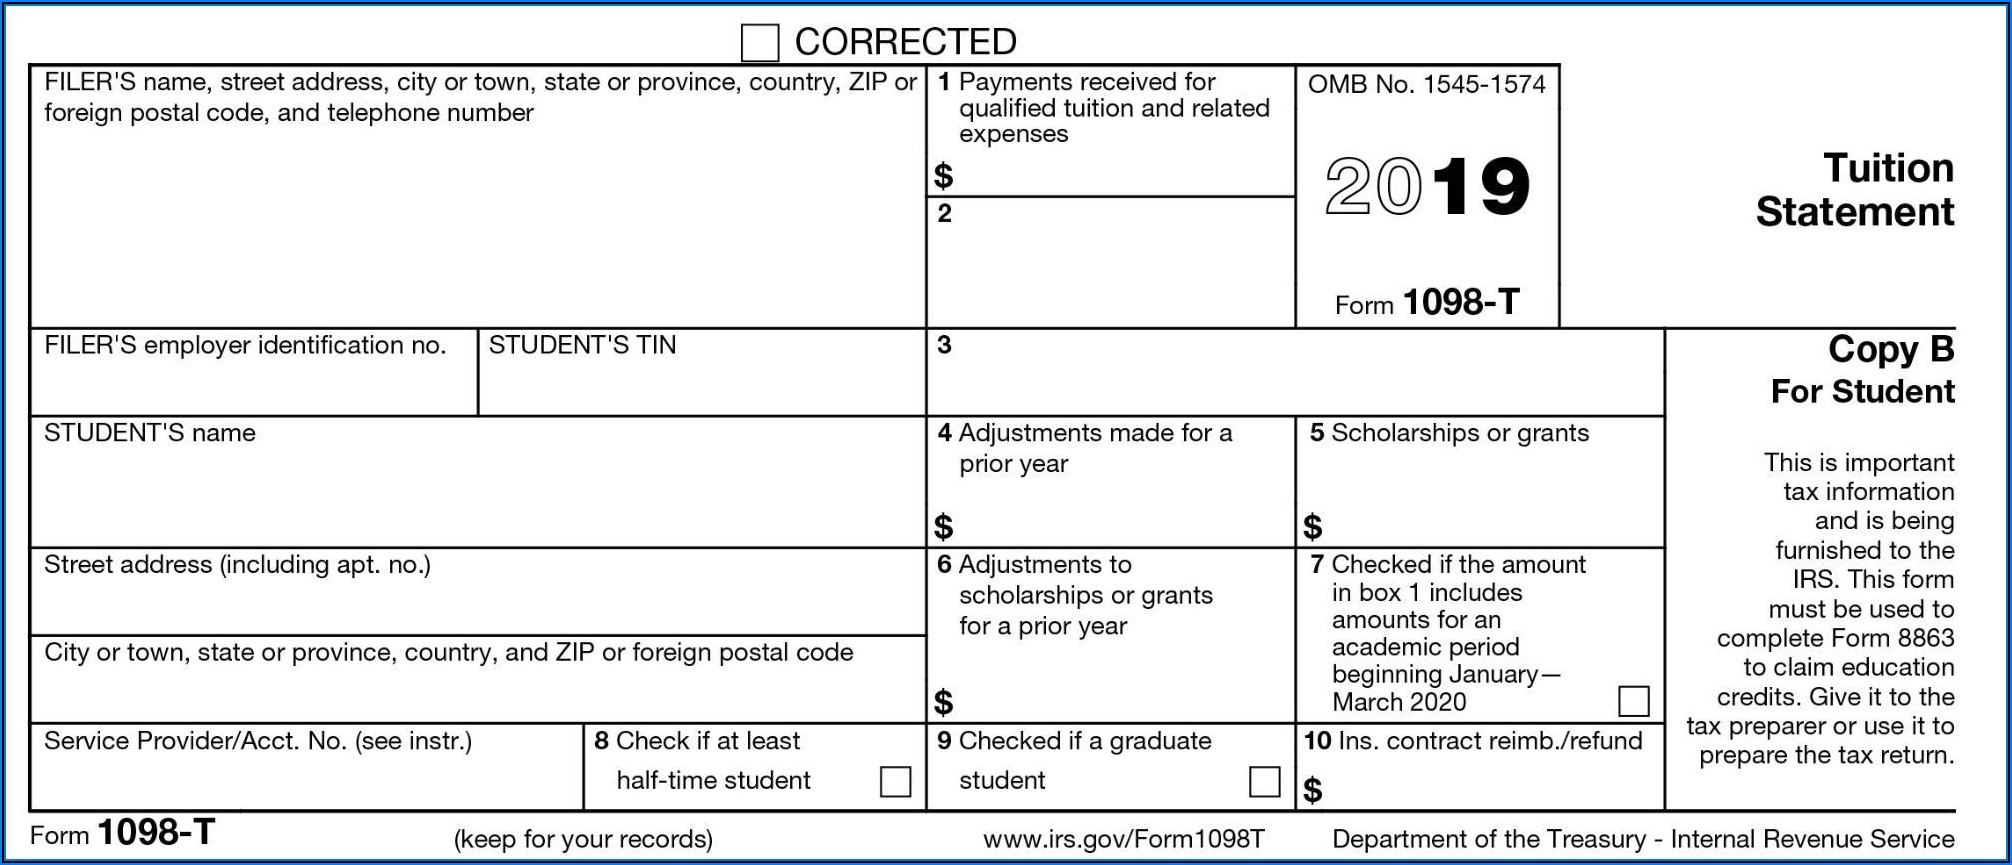 Blank 1098 T Form 2019